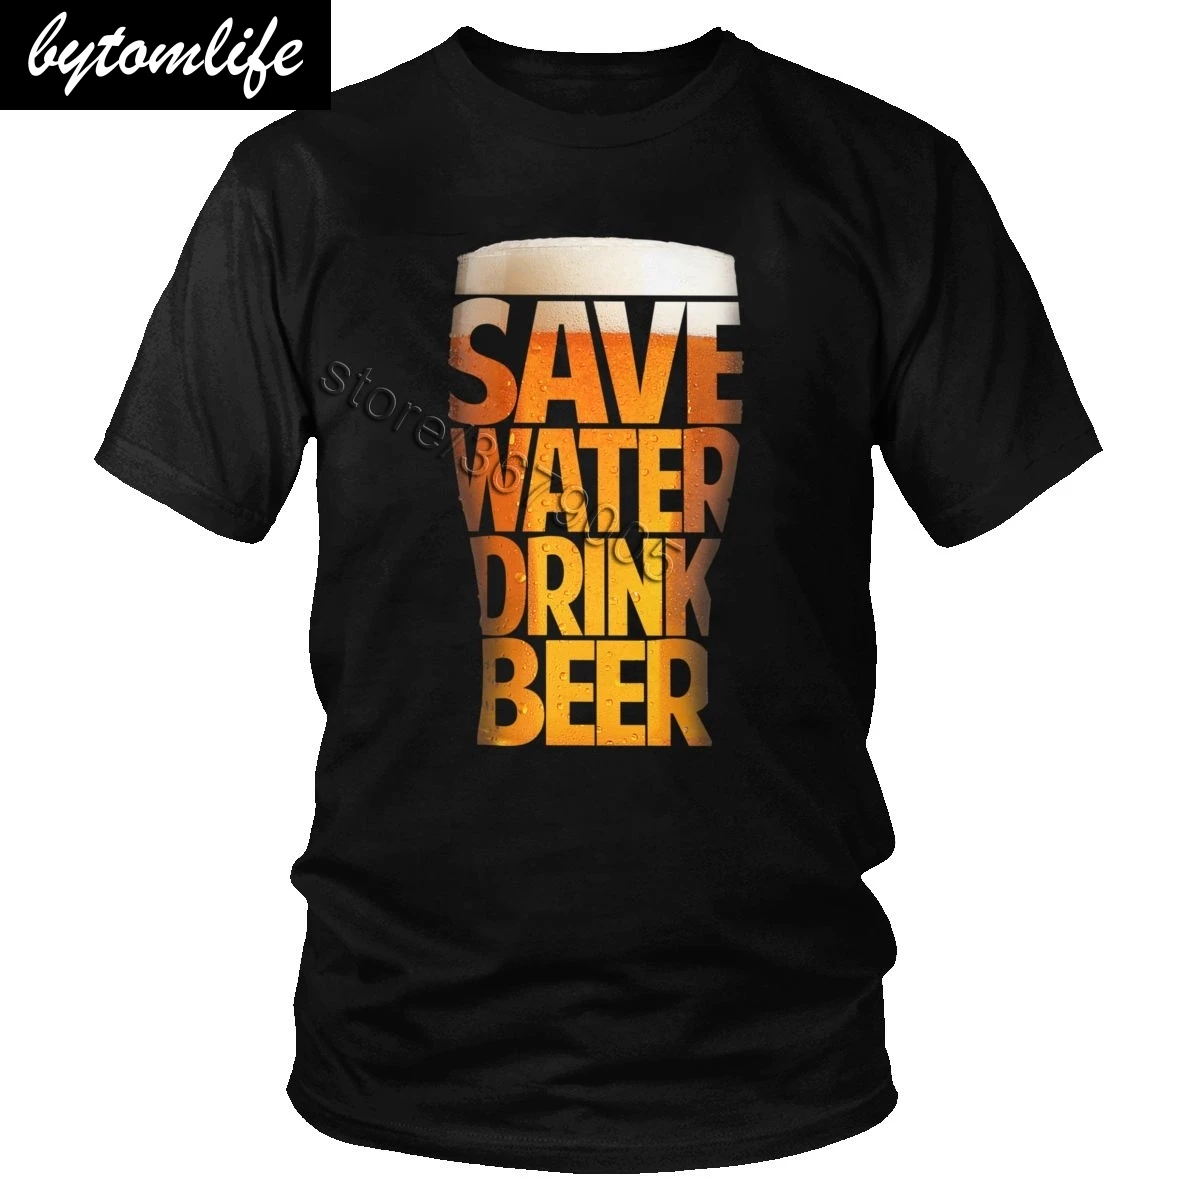 

Fashion T Shirt Men Save Water Drink Beer T-Shirt Funny Alcohol Lover Tee Classic Short Sleeves Cotton Casual Streetwear Tops